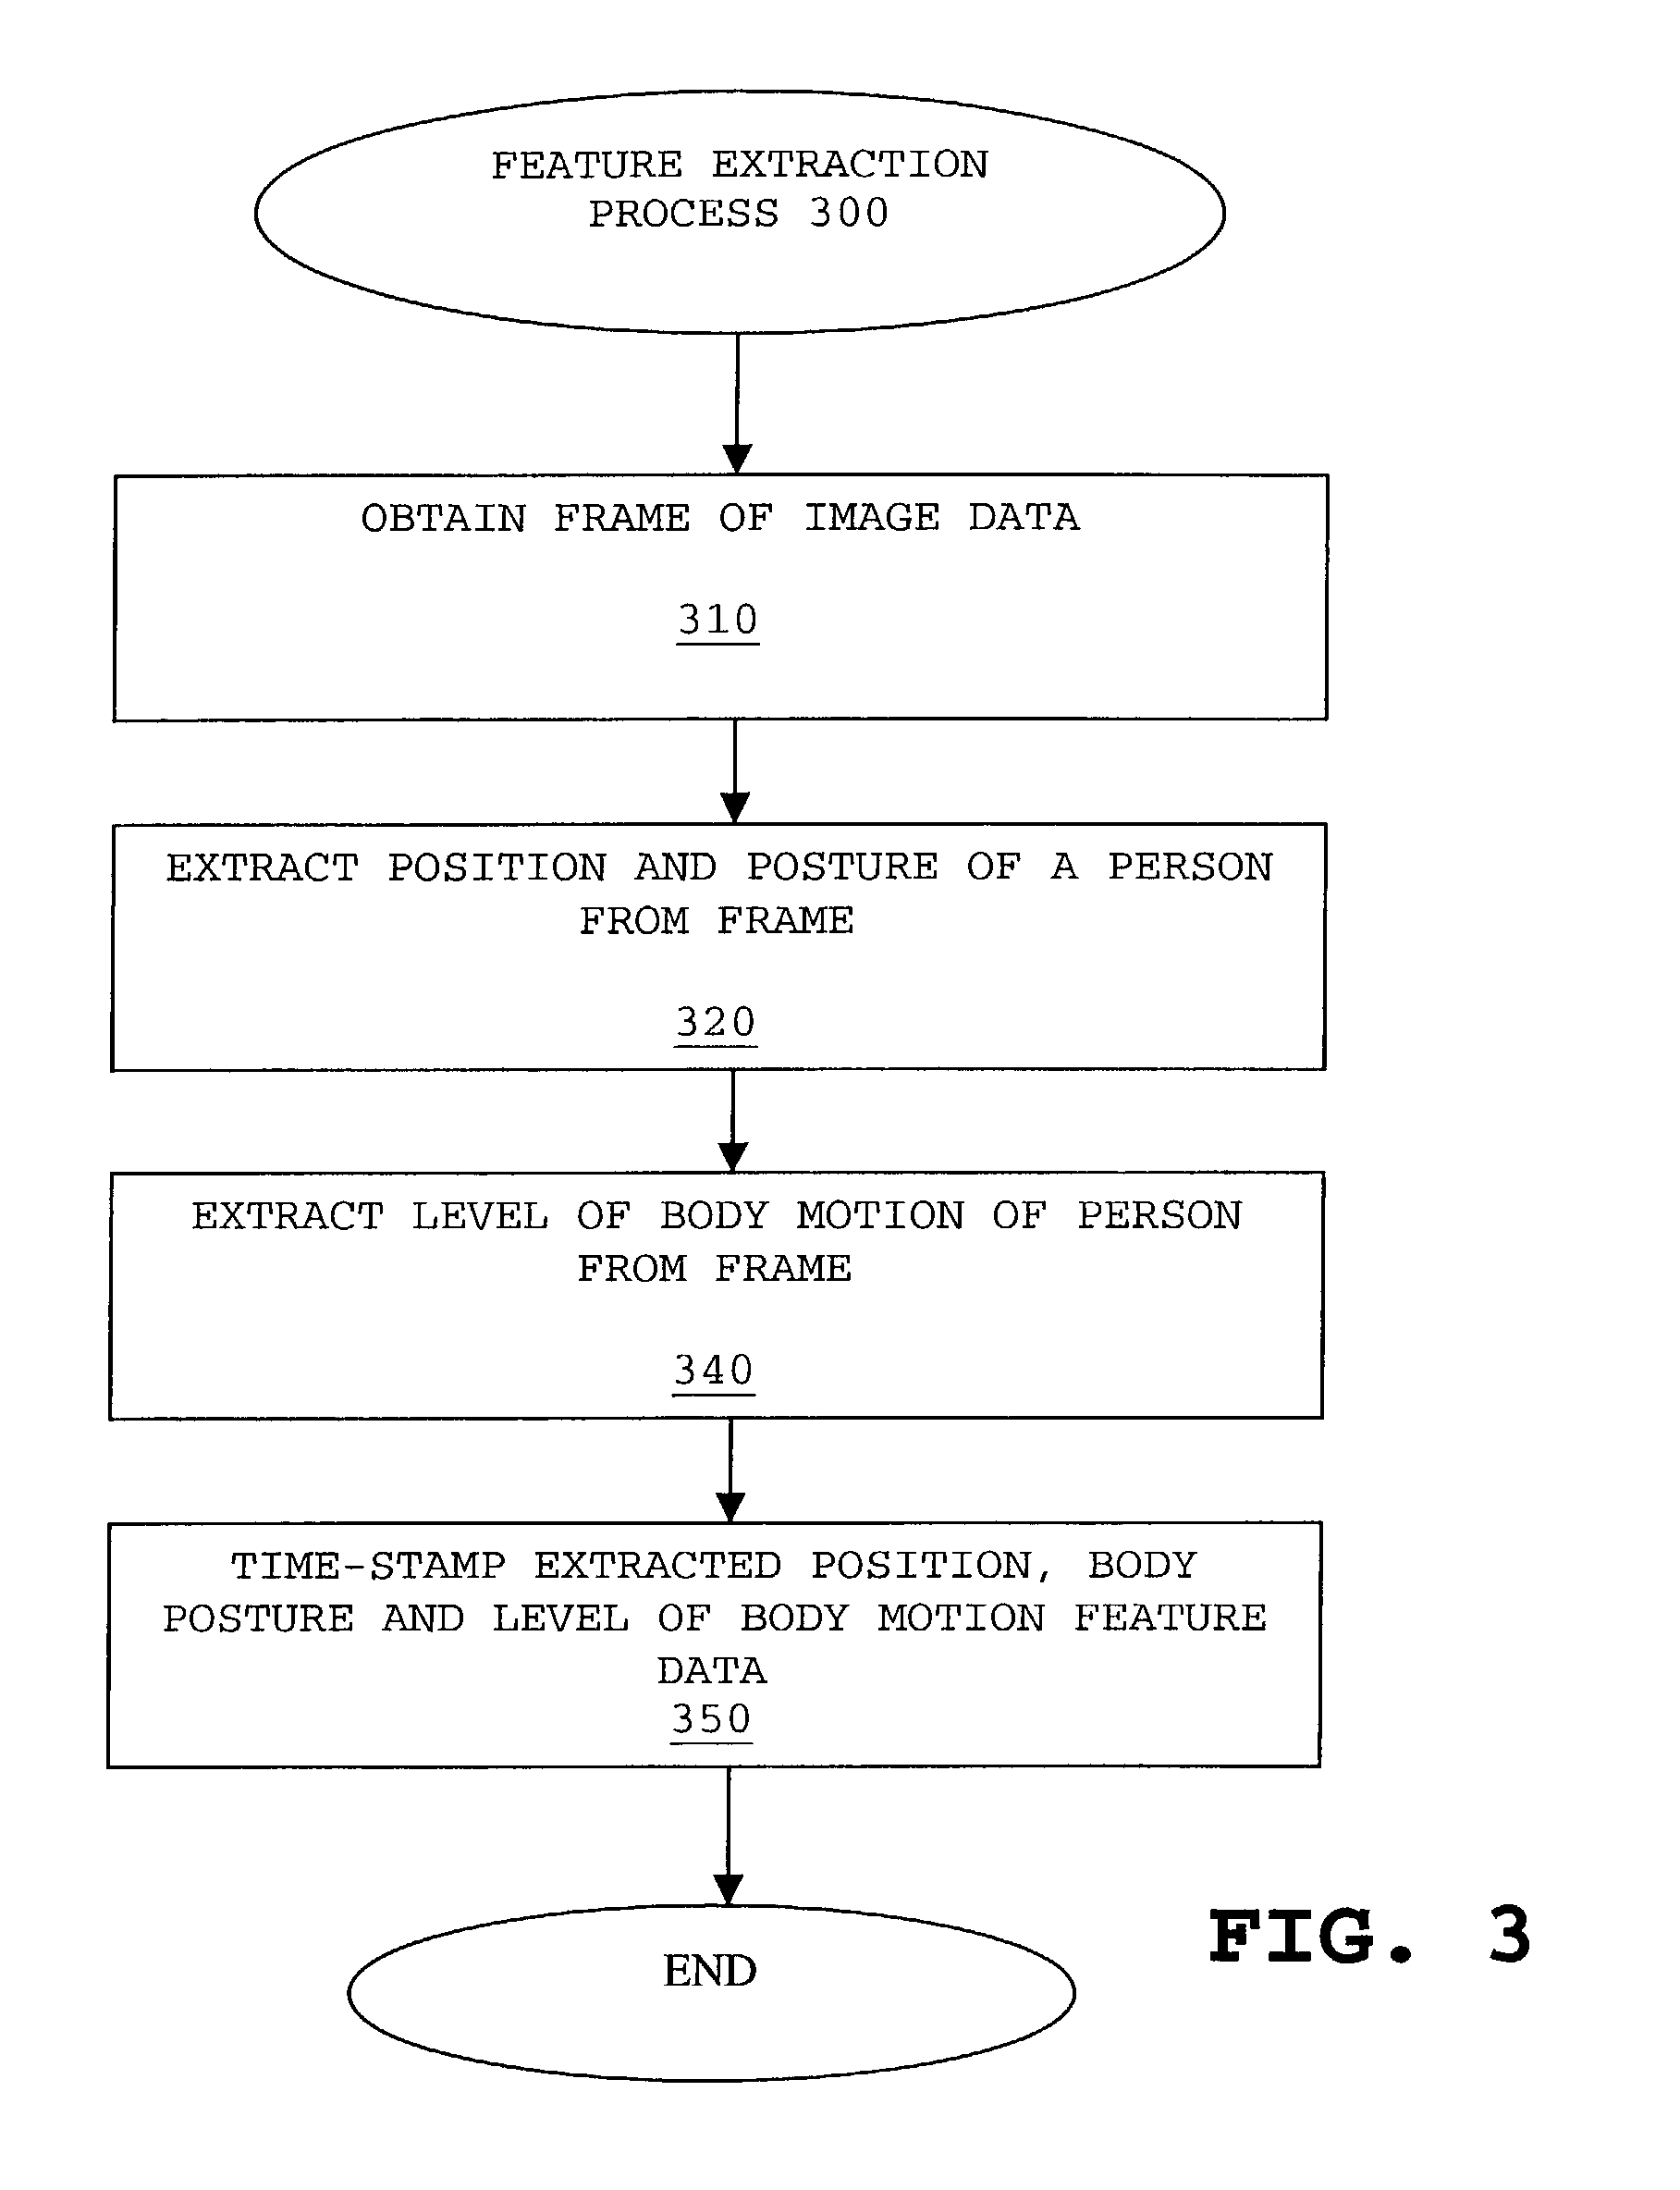 Method and apparatus for detecting an event based on patterns of behavior